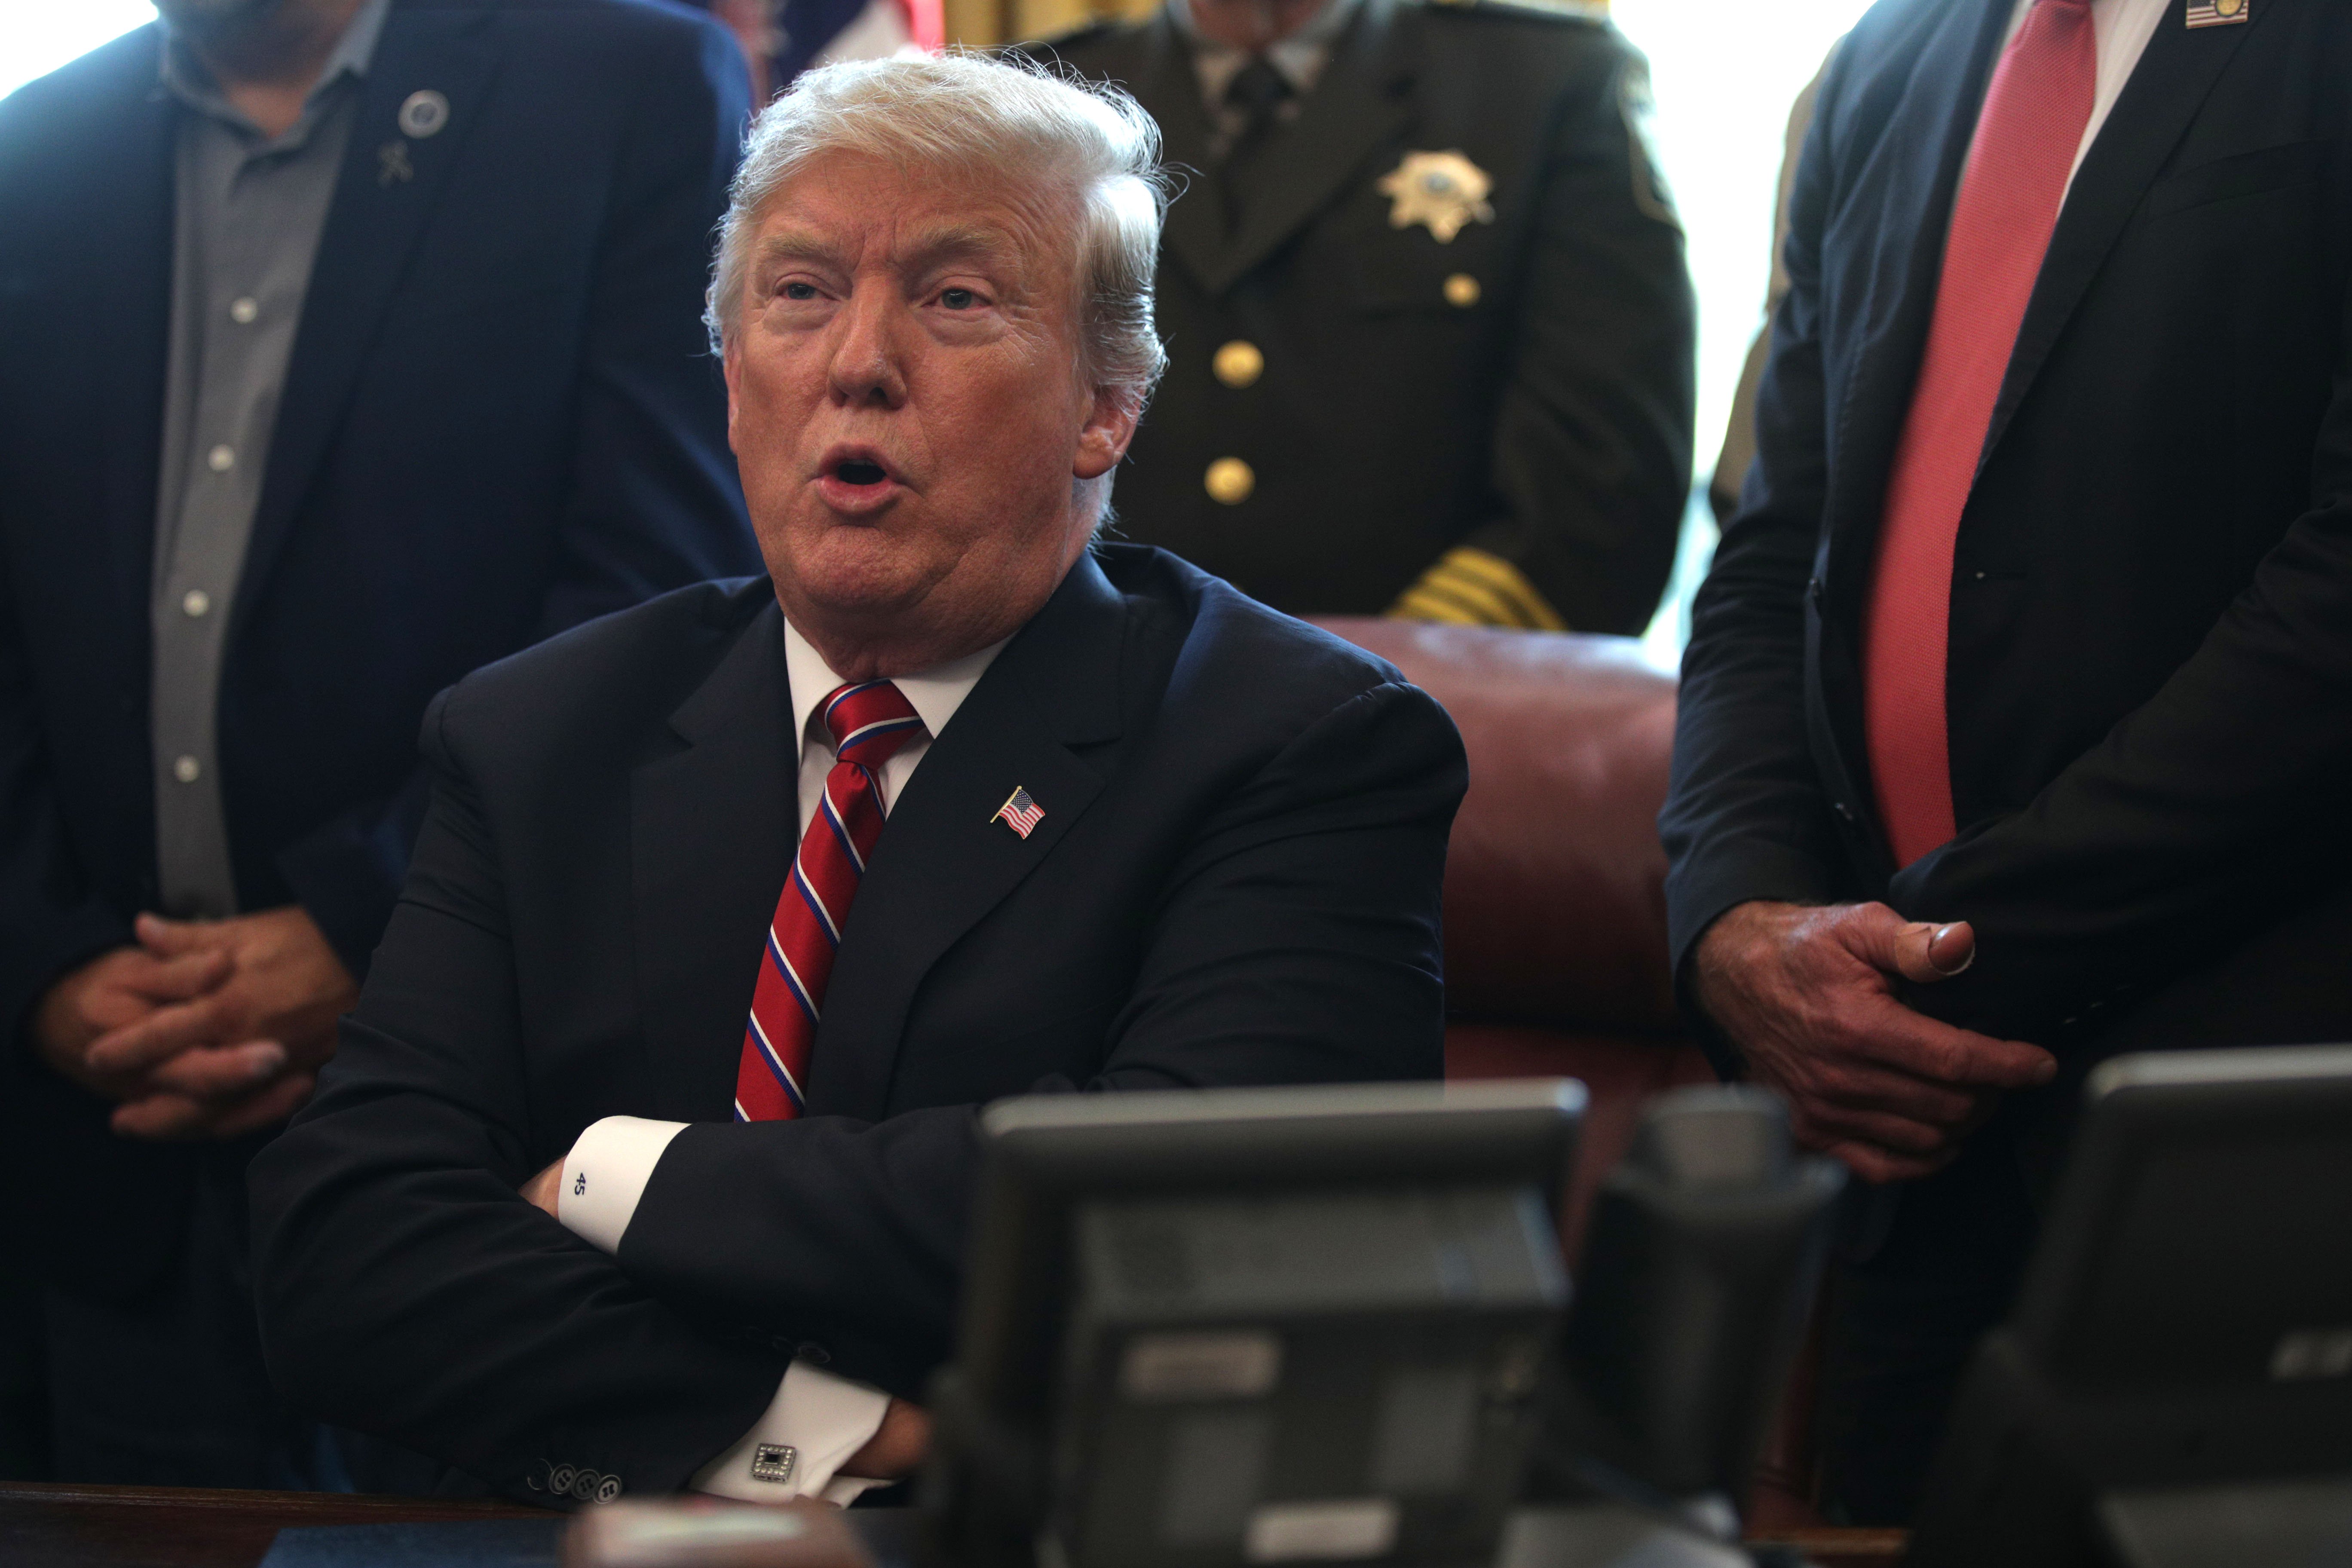 Donald Trump during a border security meeting in the oval office at the White House | Photo: Getty Images